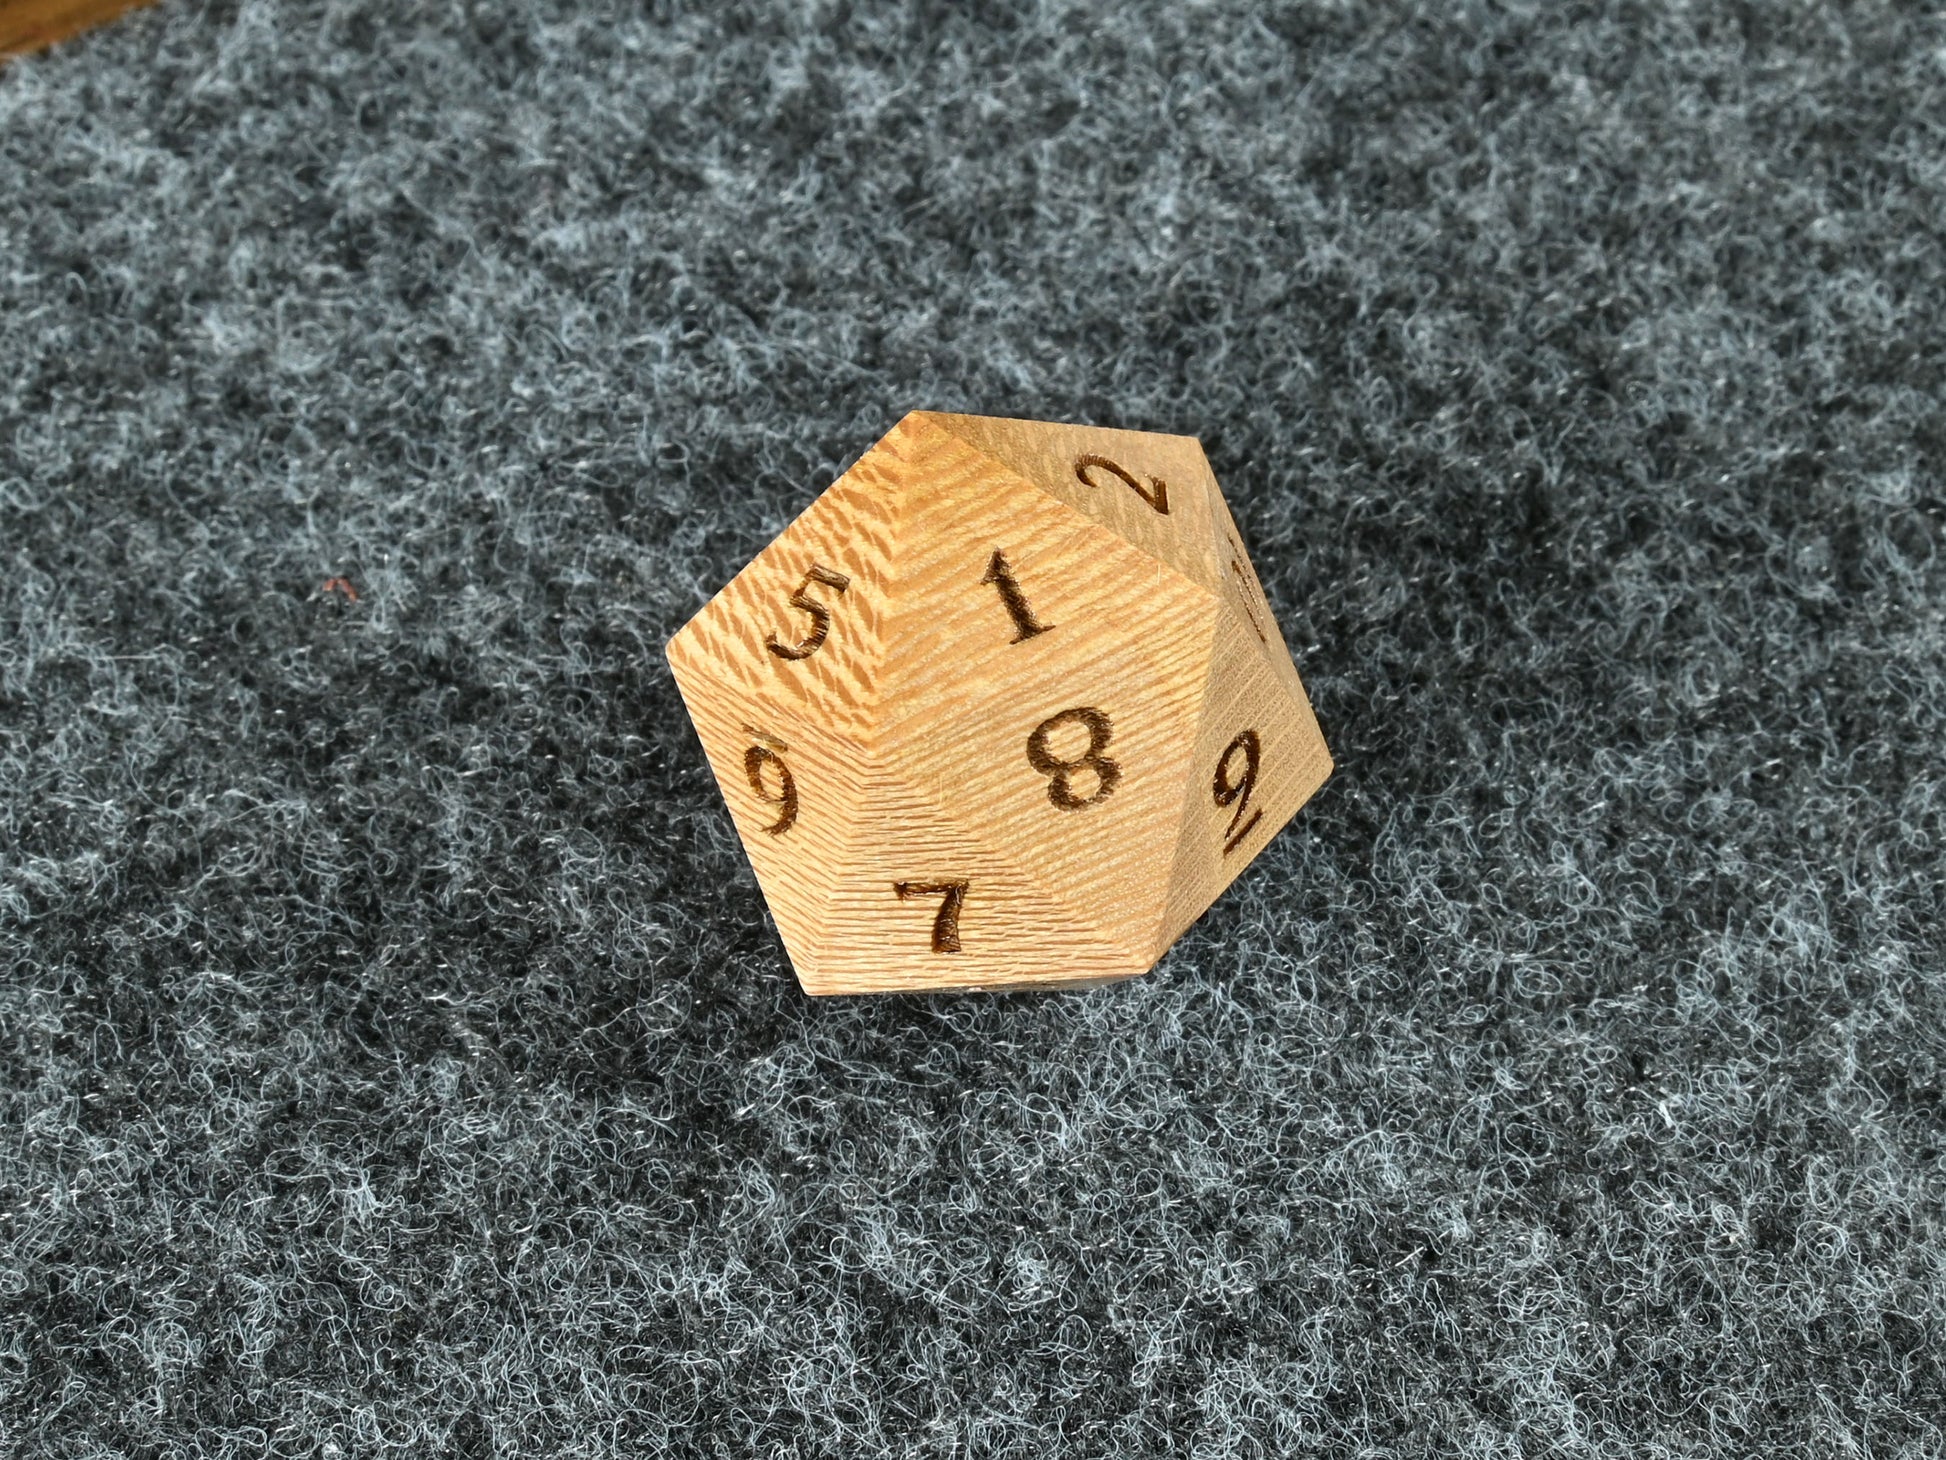 Sycamore wood spindown d20